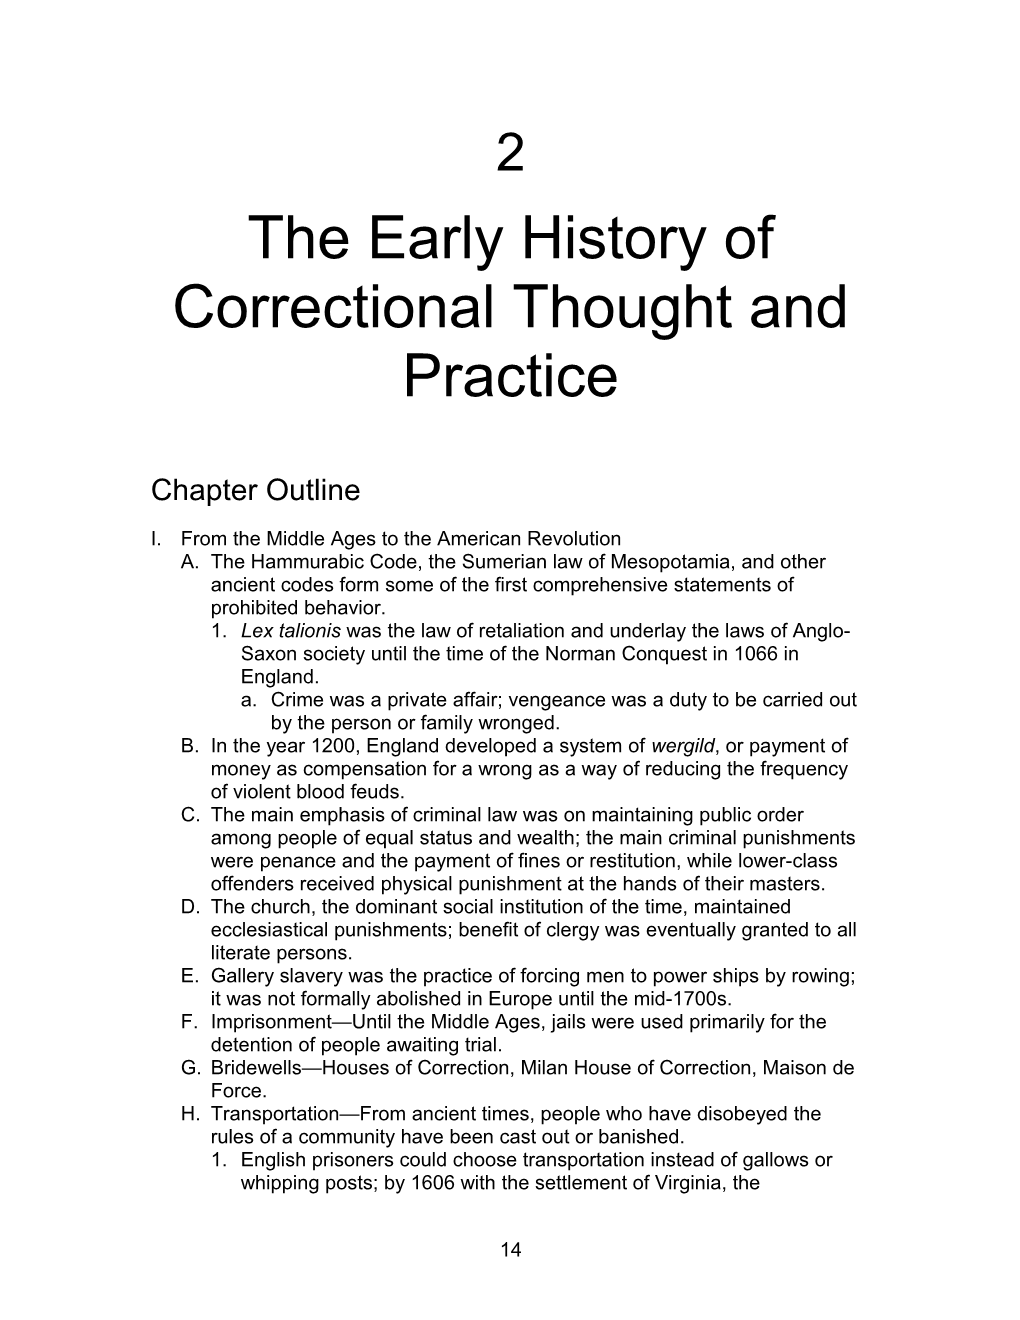 The Early History of Correctional Thought and Practice